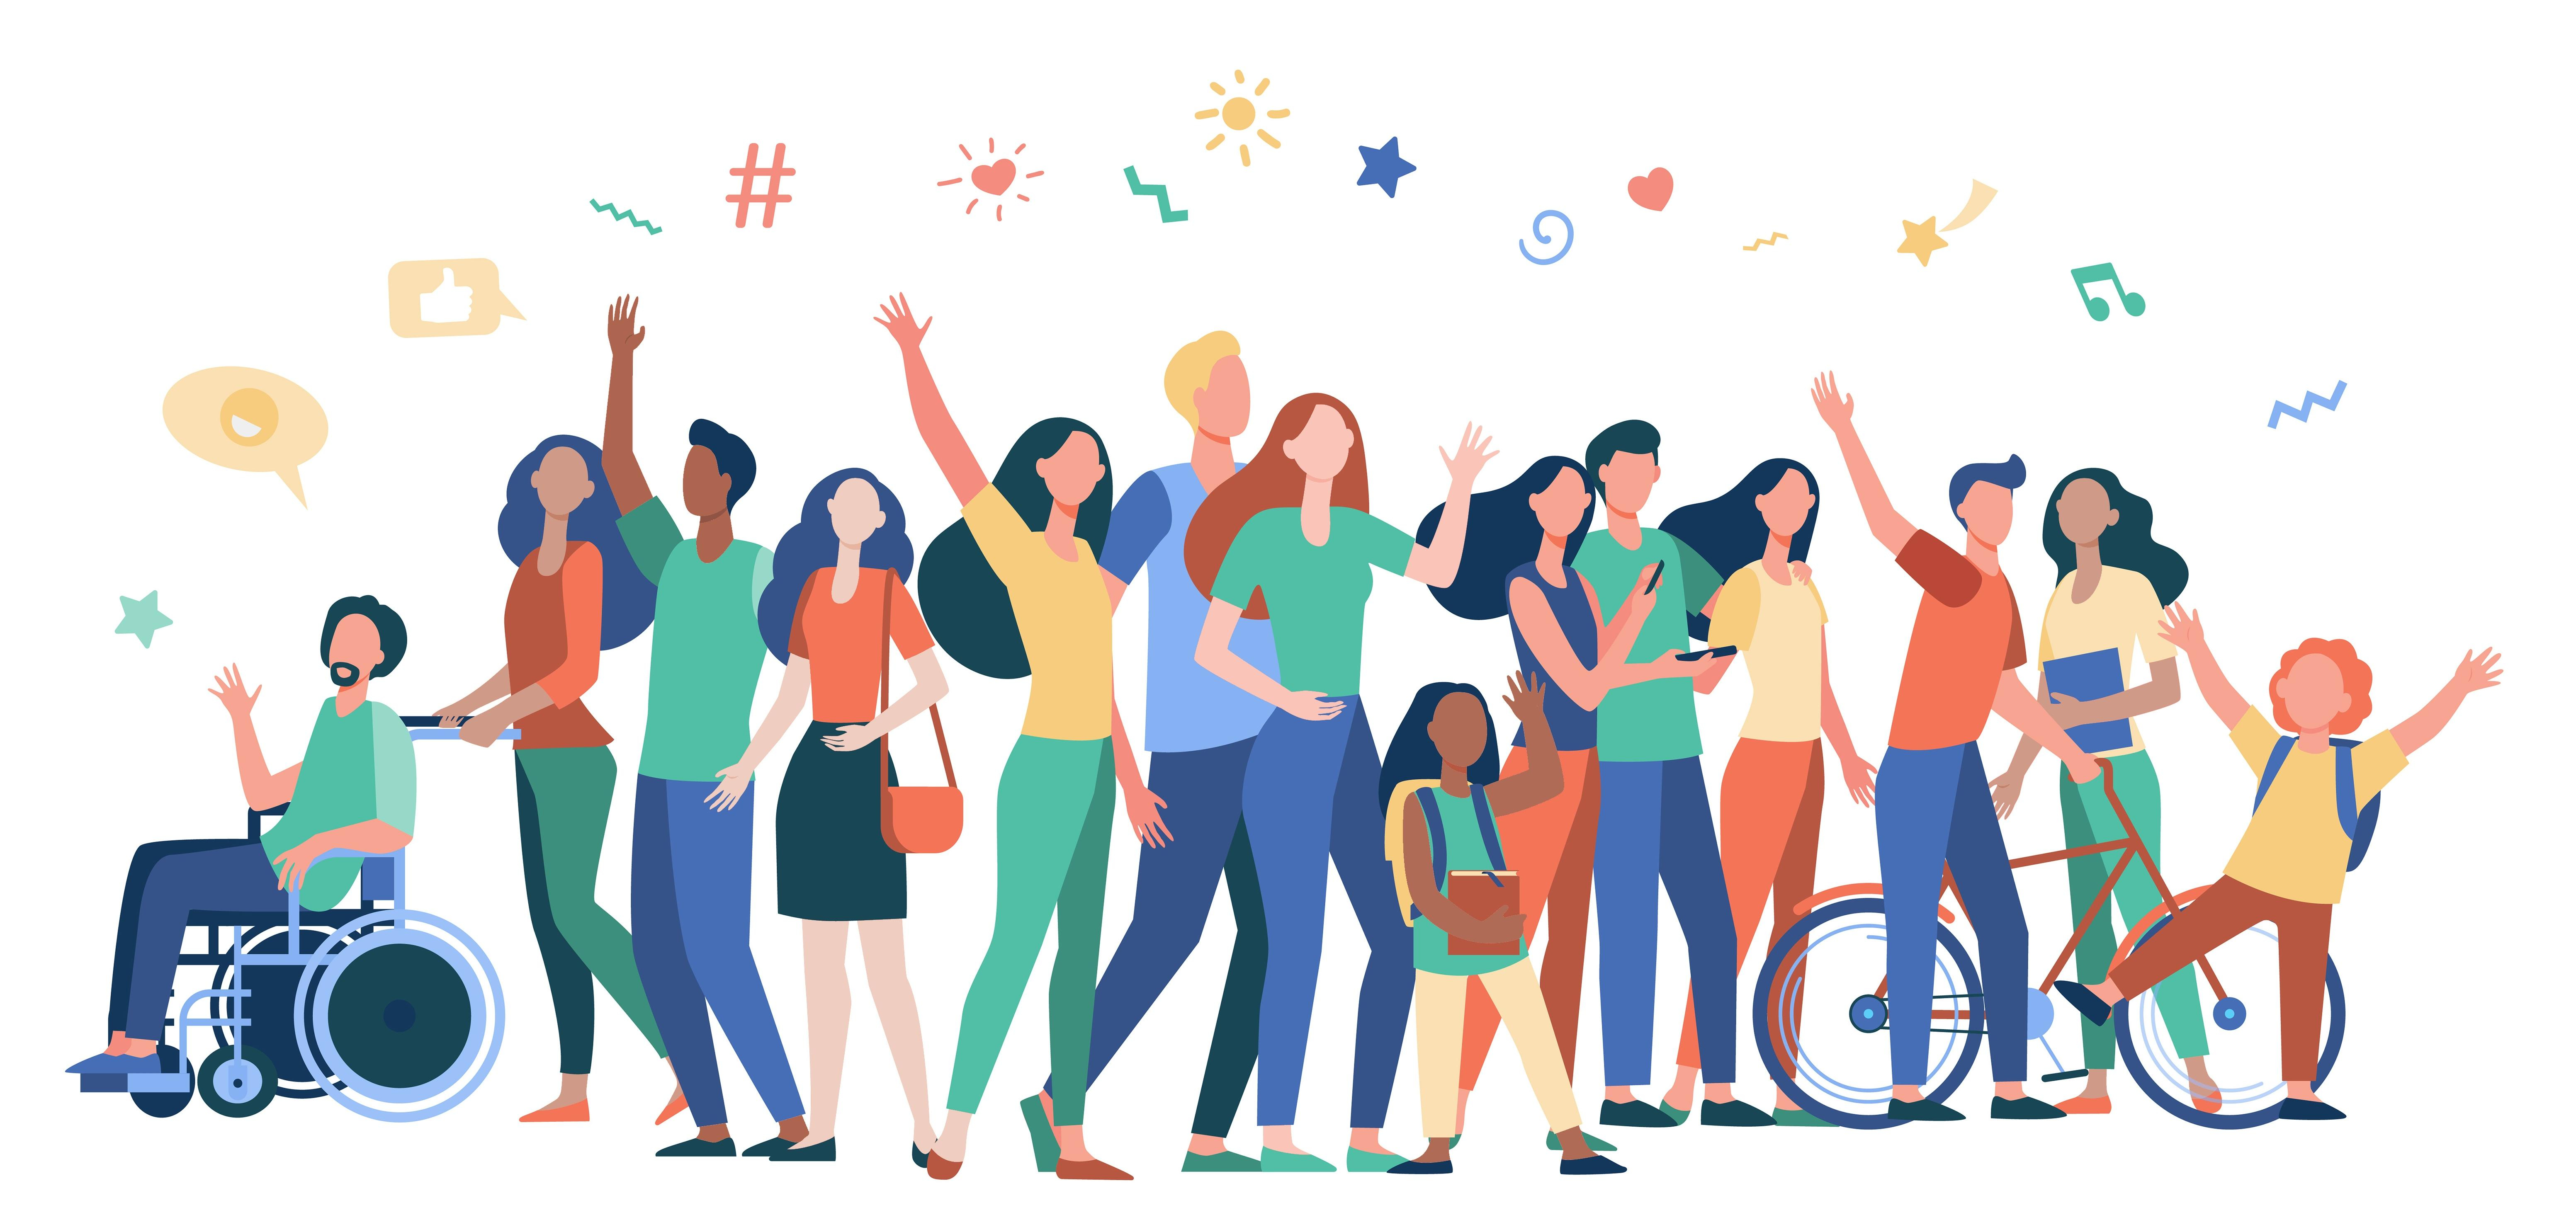 Multicultural people standing together isolated flat vector illustration. Cartoon diverse characters of multinational community members. Society and public concept